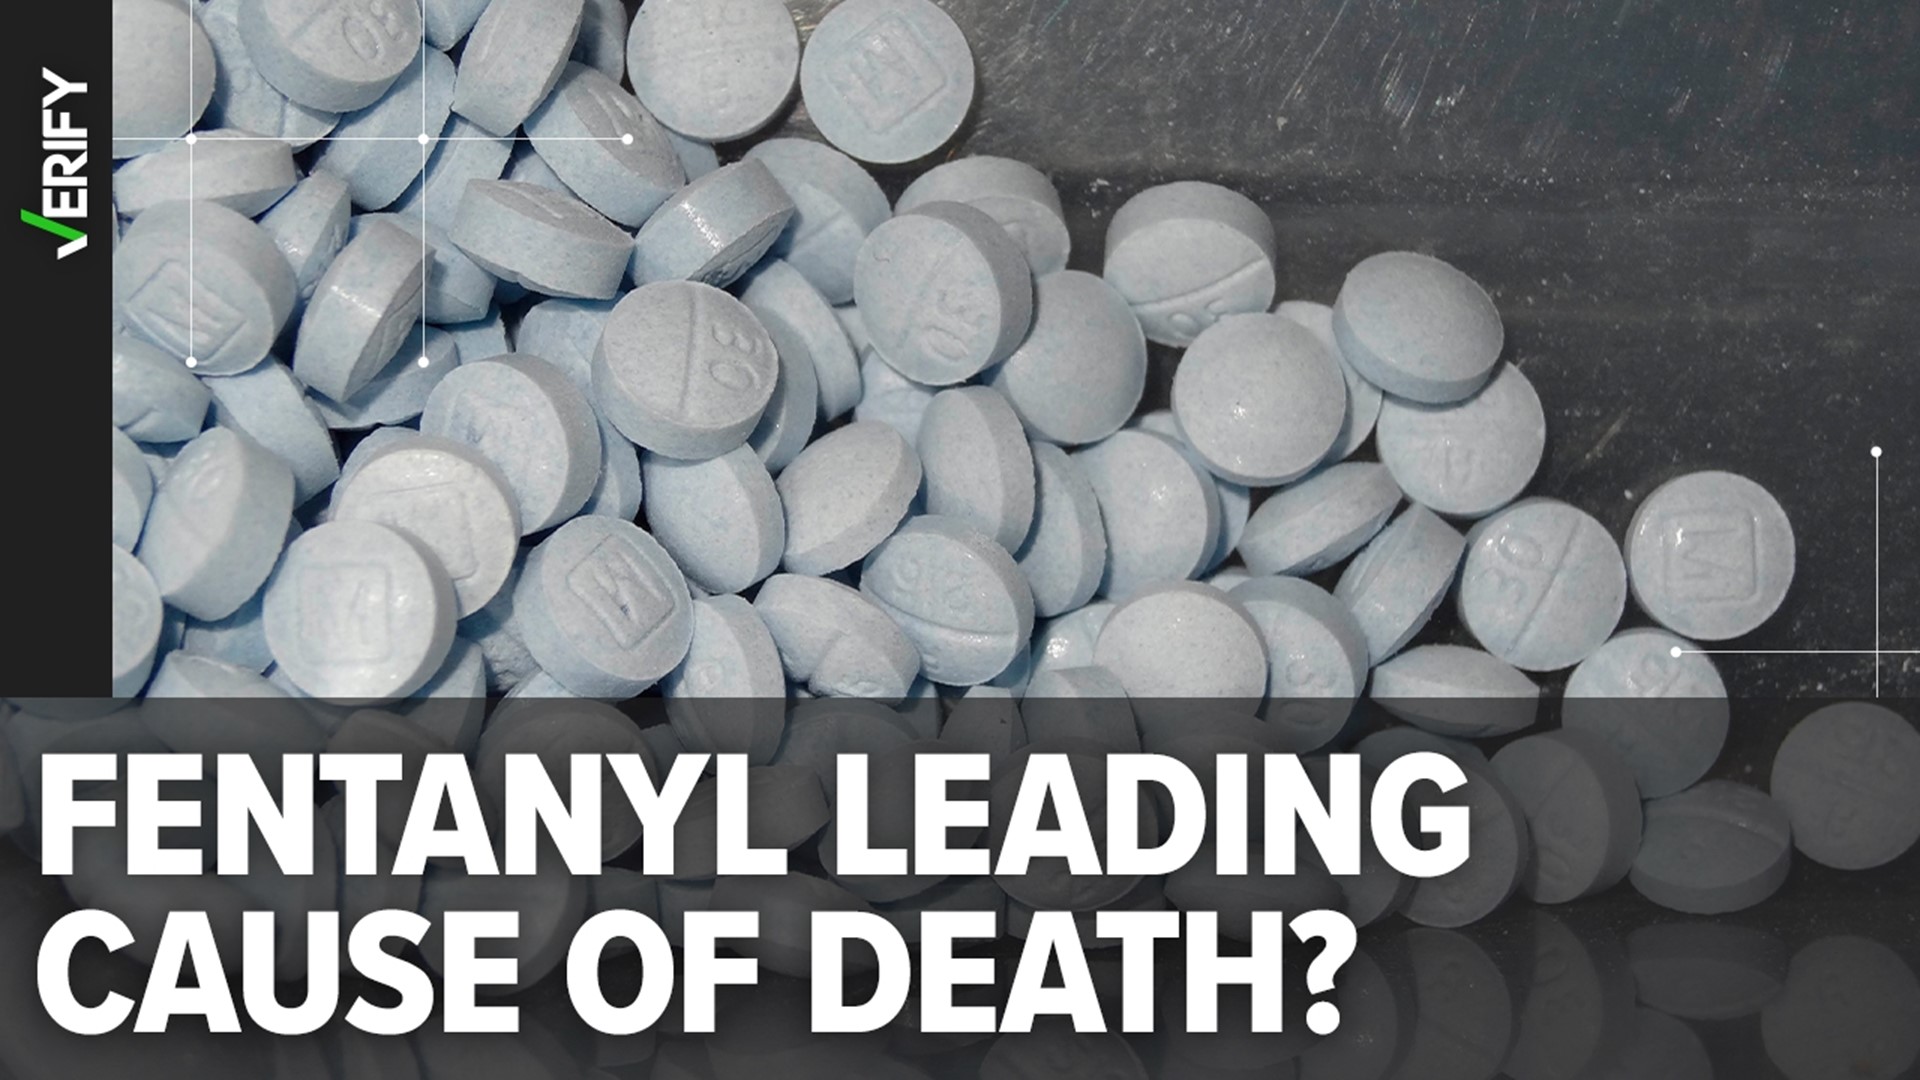 Viral posts claim fentanyl is the leading cause of death for American adults. But CDC does not track the exact number of fentanyl deaths in the 18 to 45 age group.